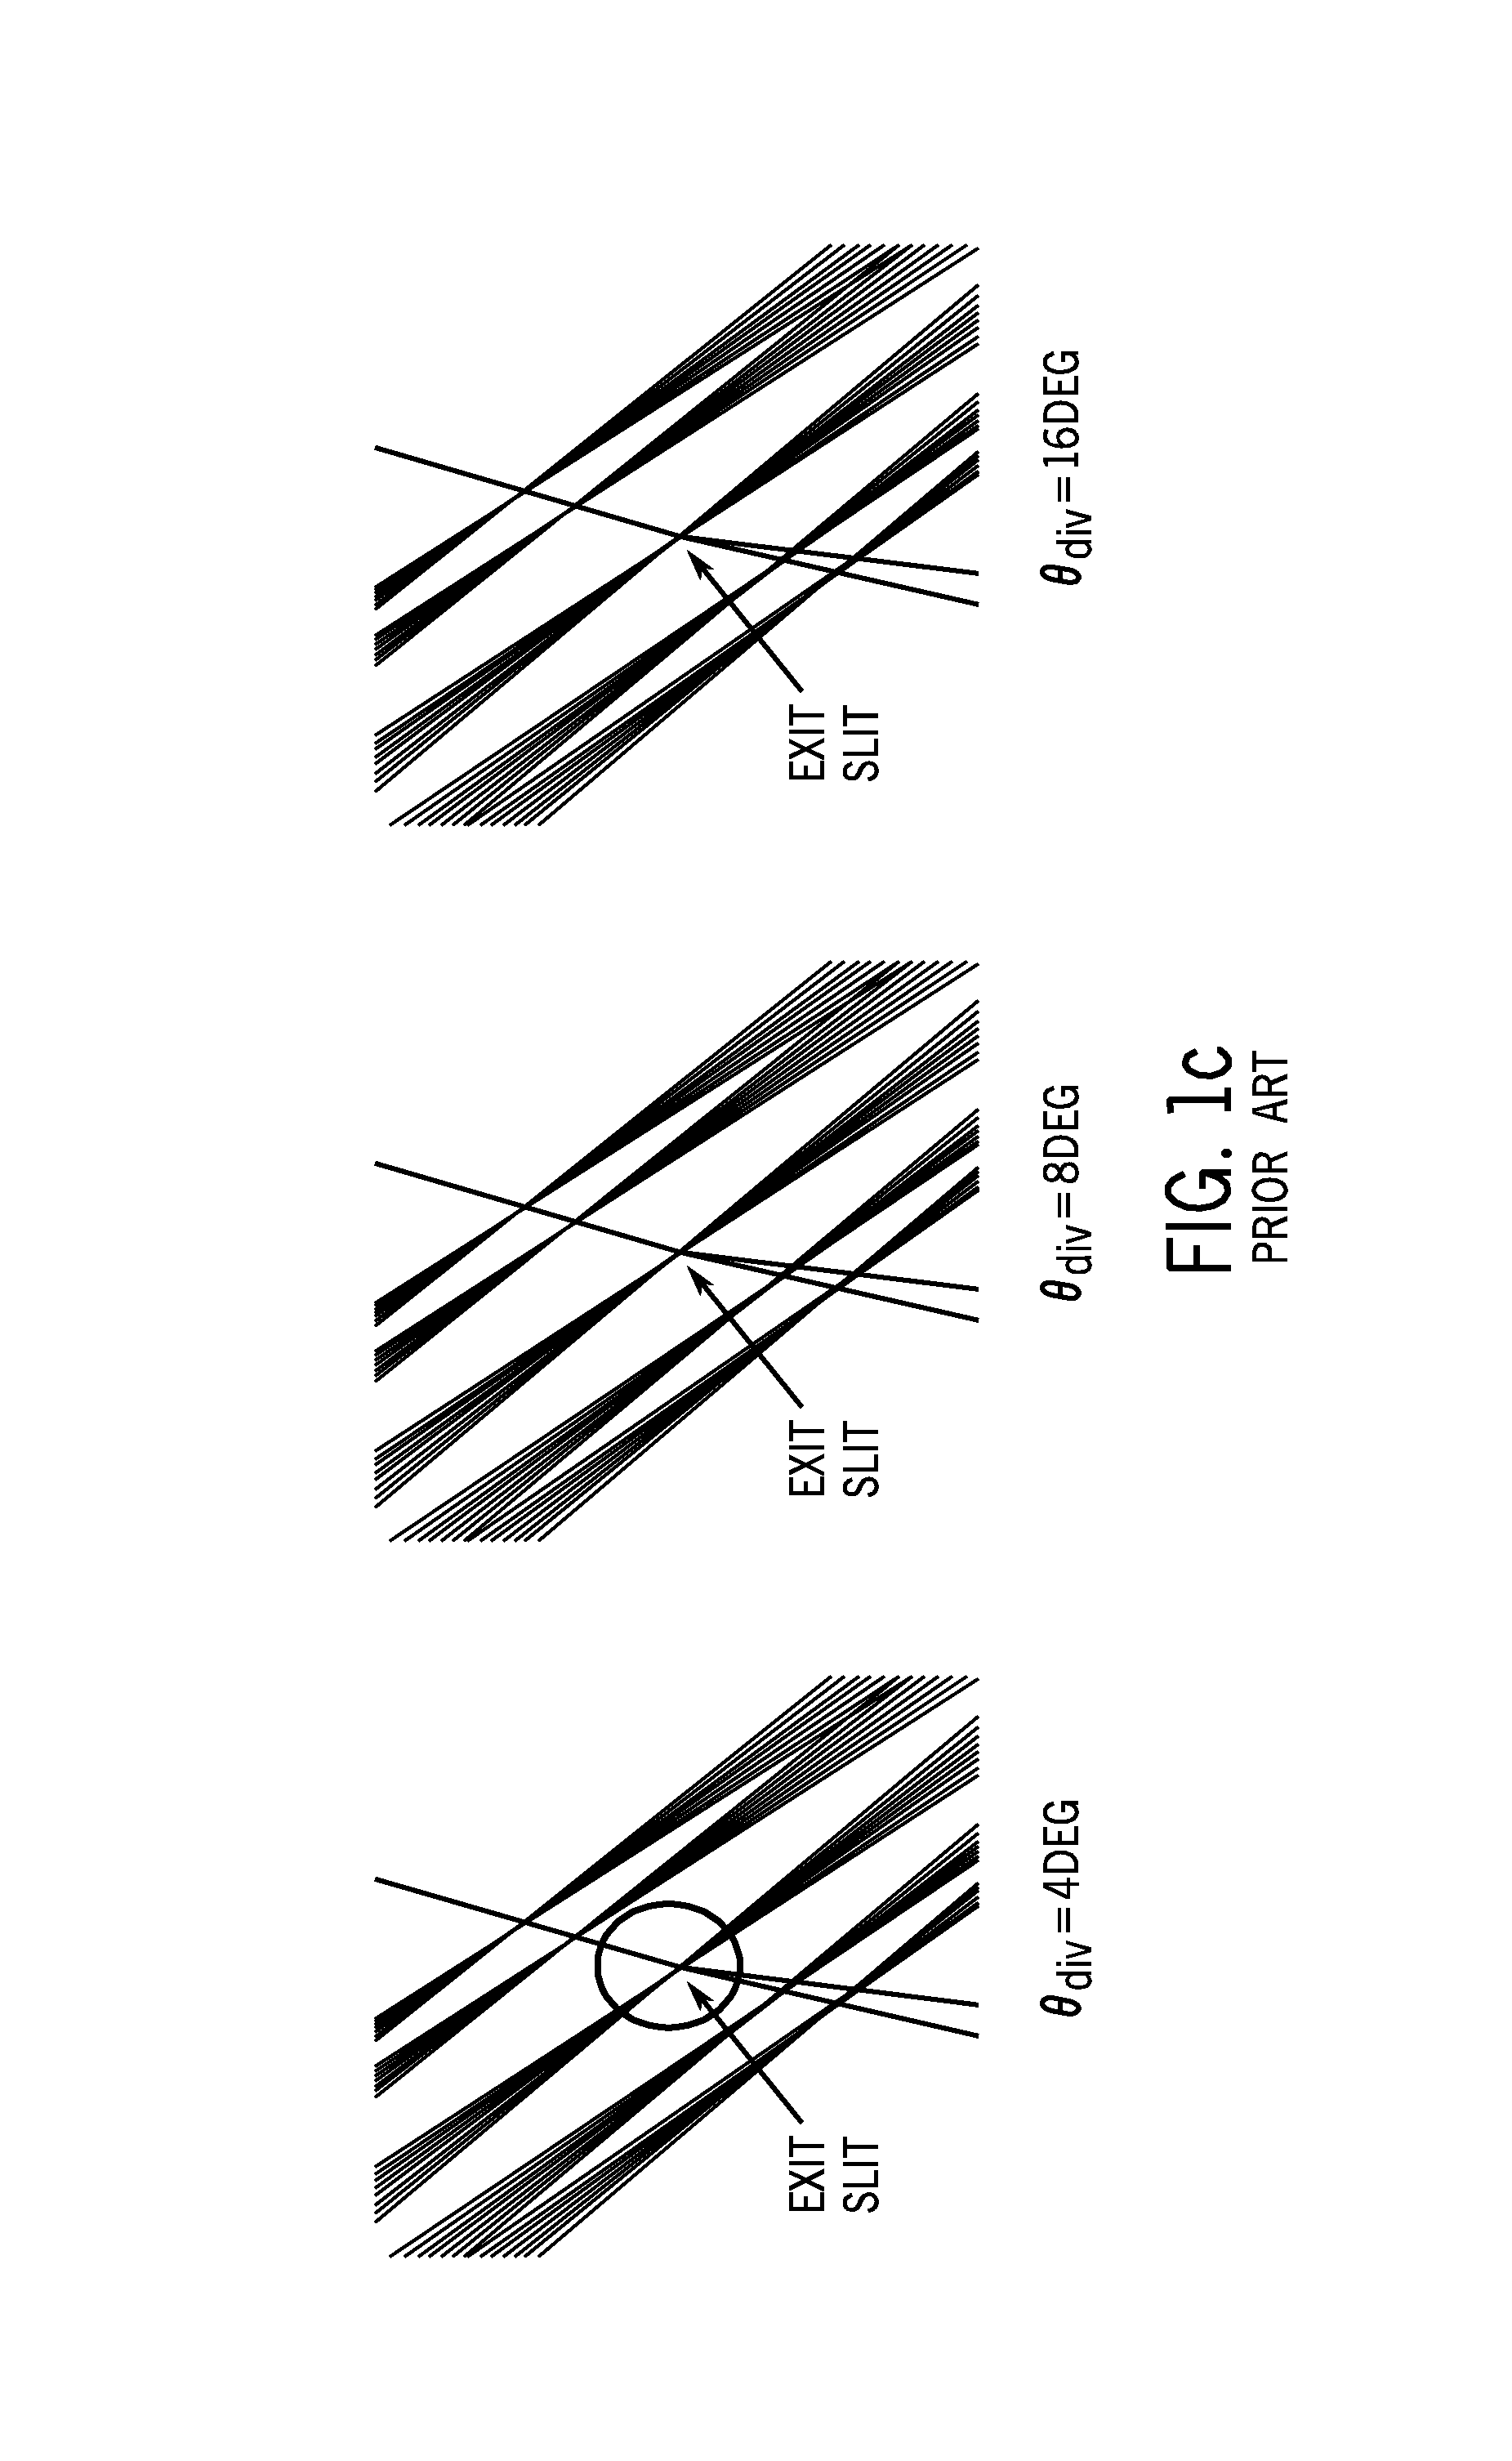 Curved grating spectrometer and wavelength multiplexer or demultiplexer with very high wavelength resolution